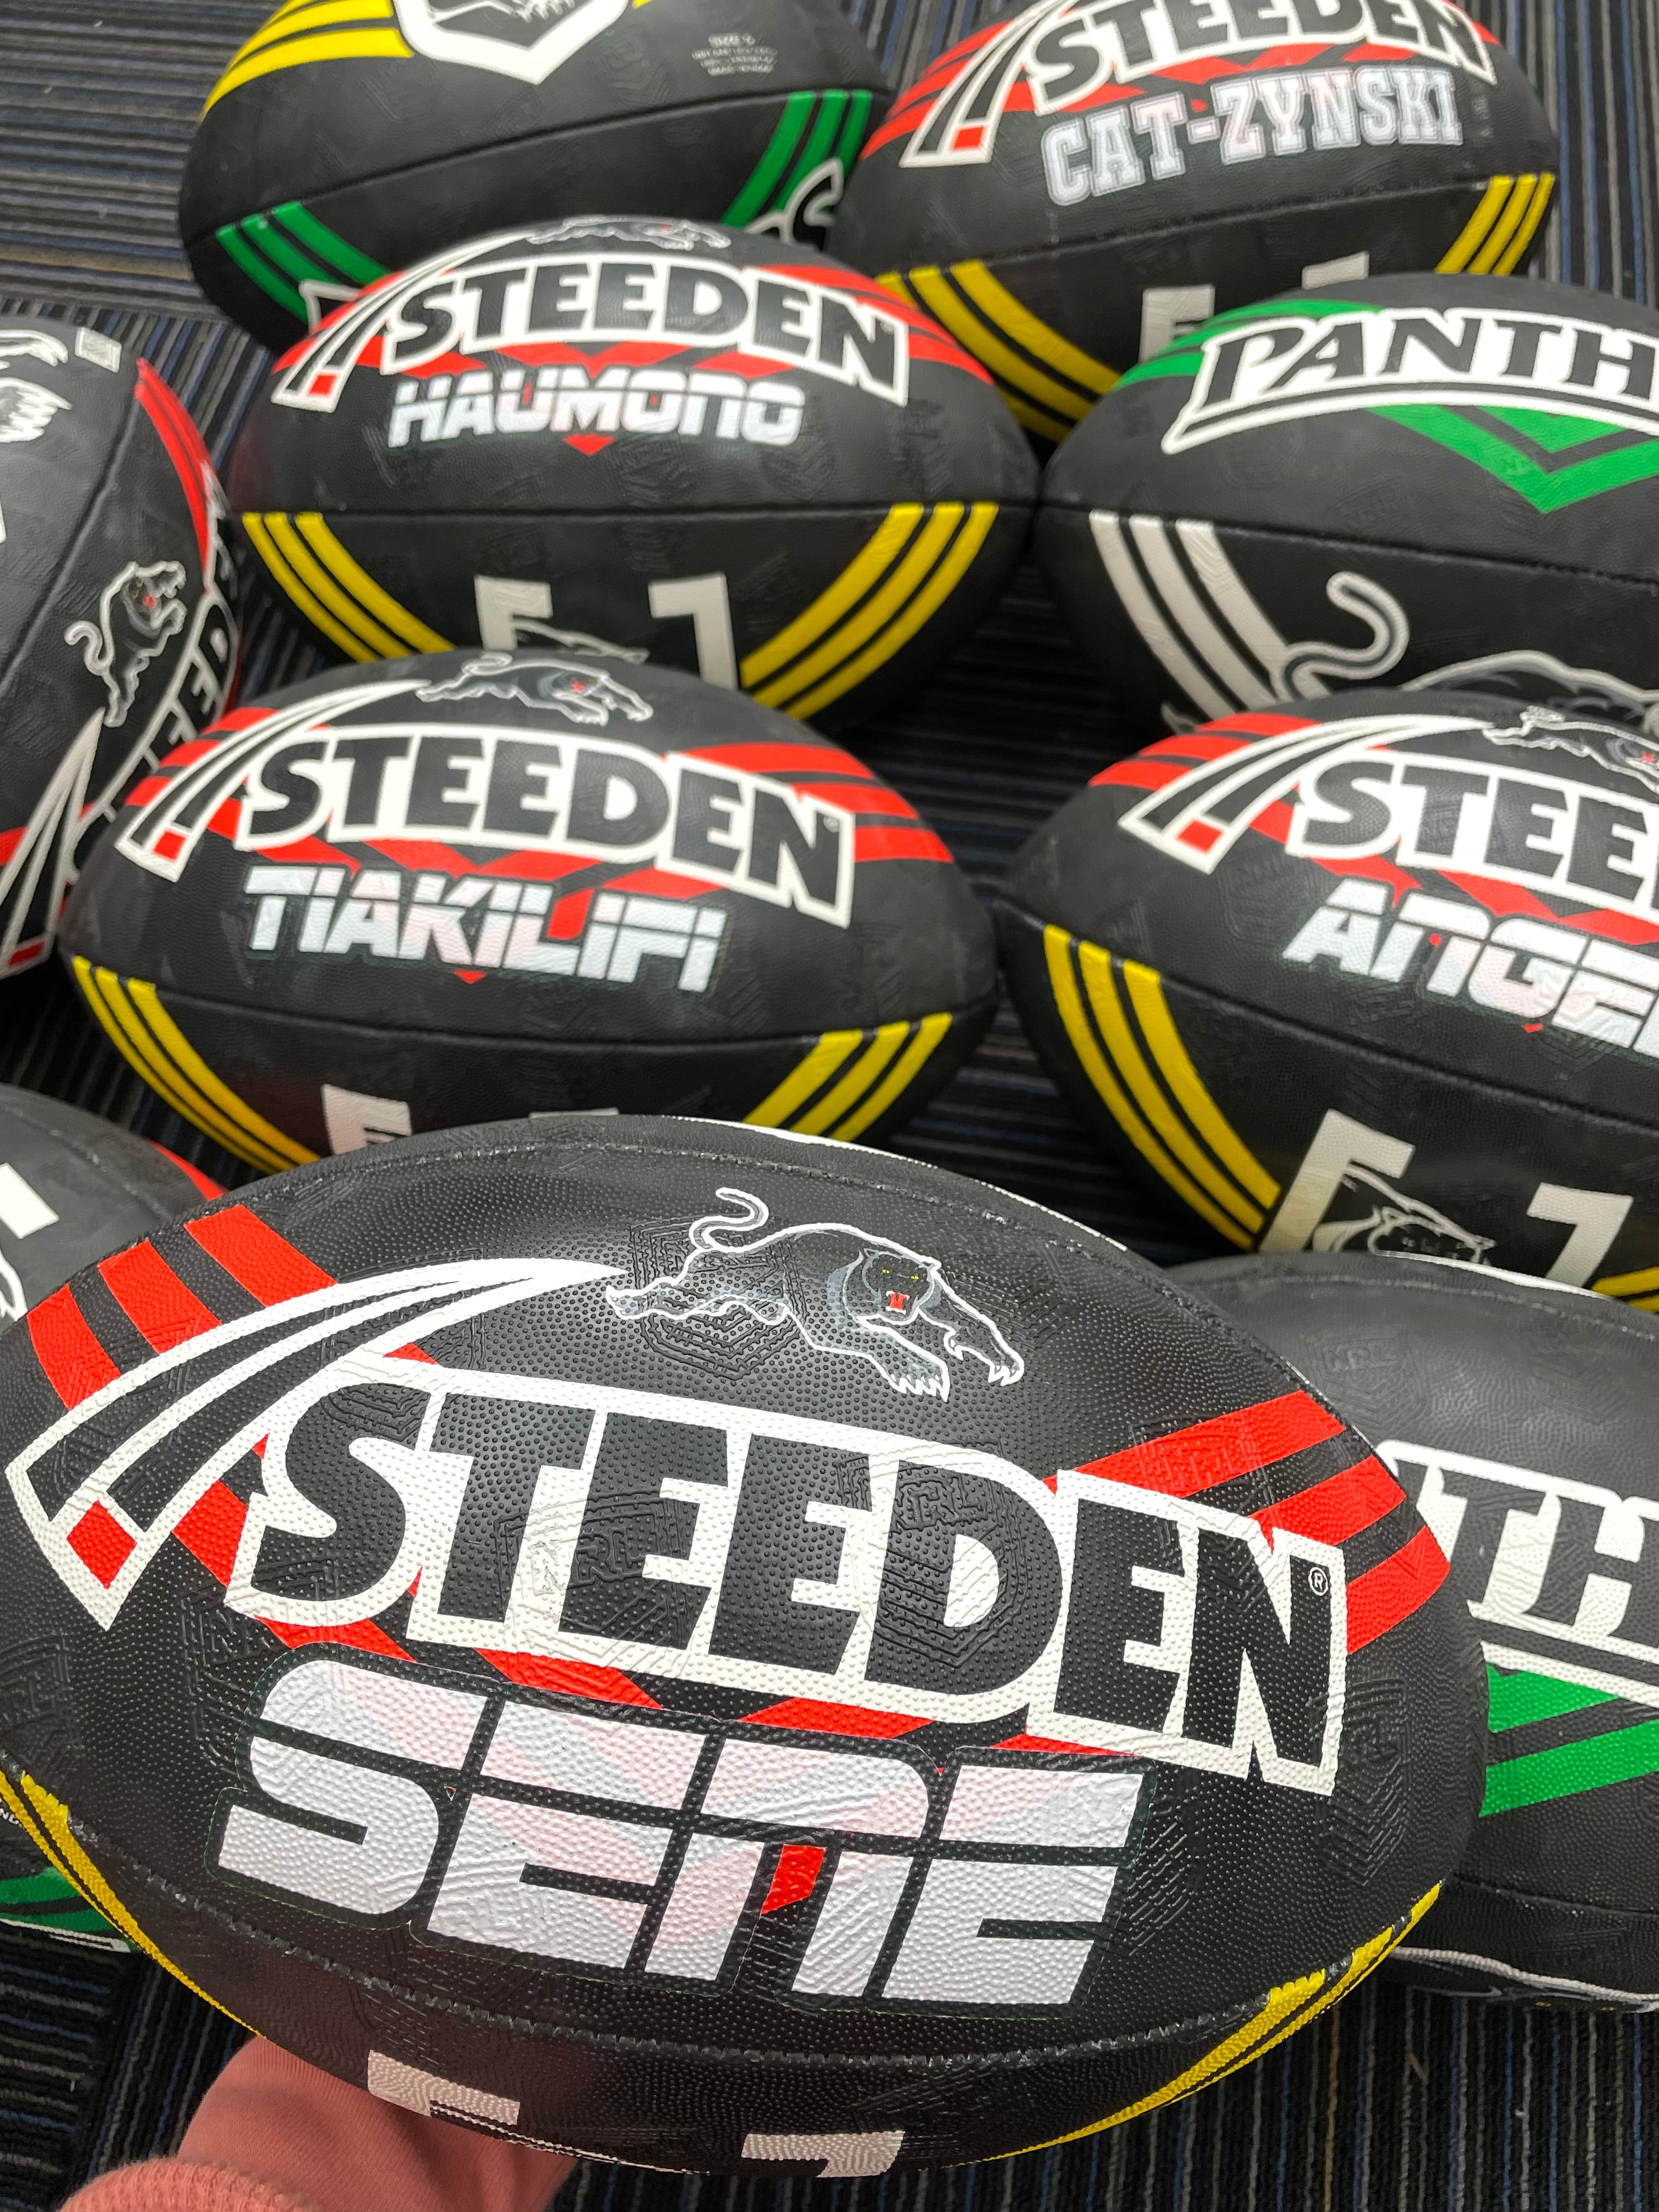 Personalised Penrith Panthers Official NRL Ball (size 5)